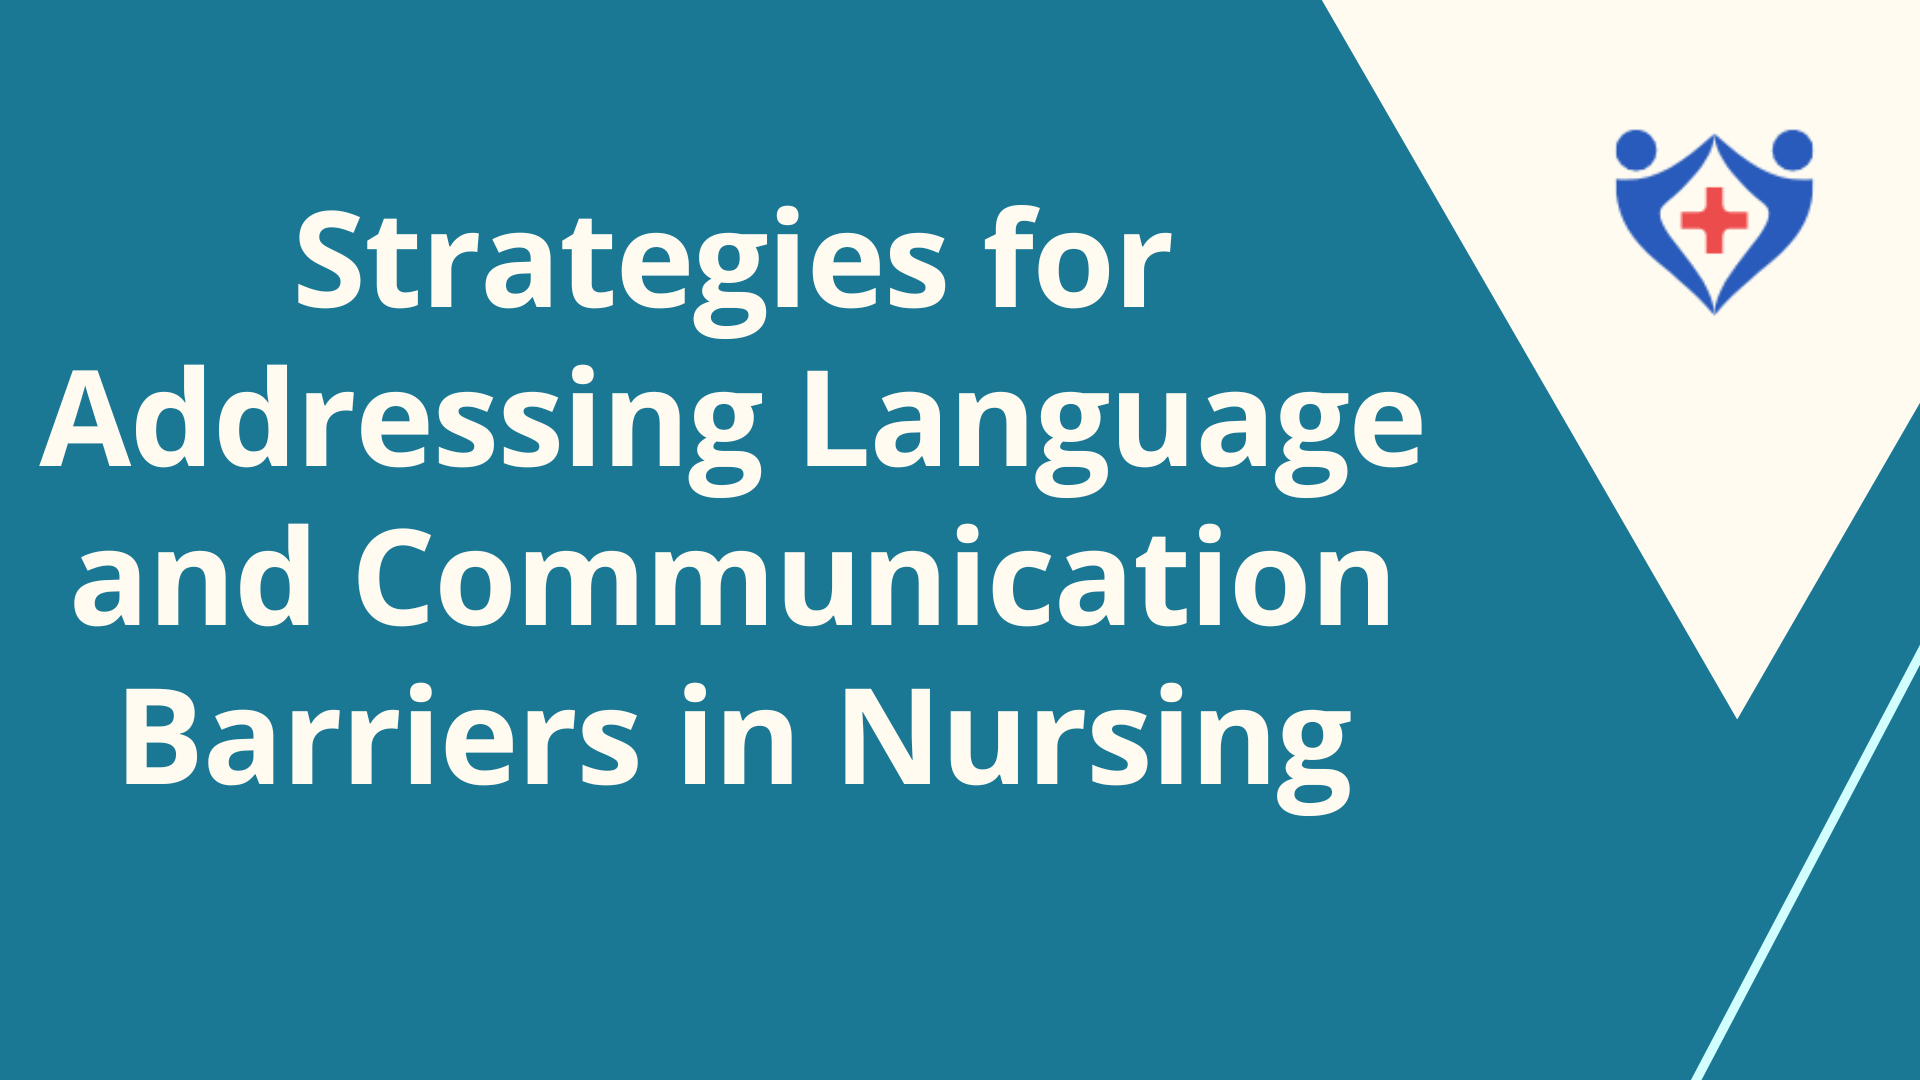 Strategies for Addressing Language and Communication Barriers in Nursing